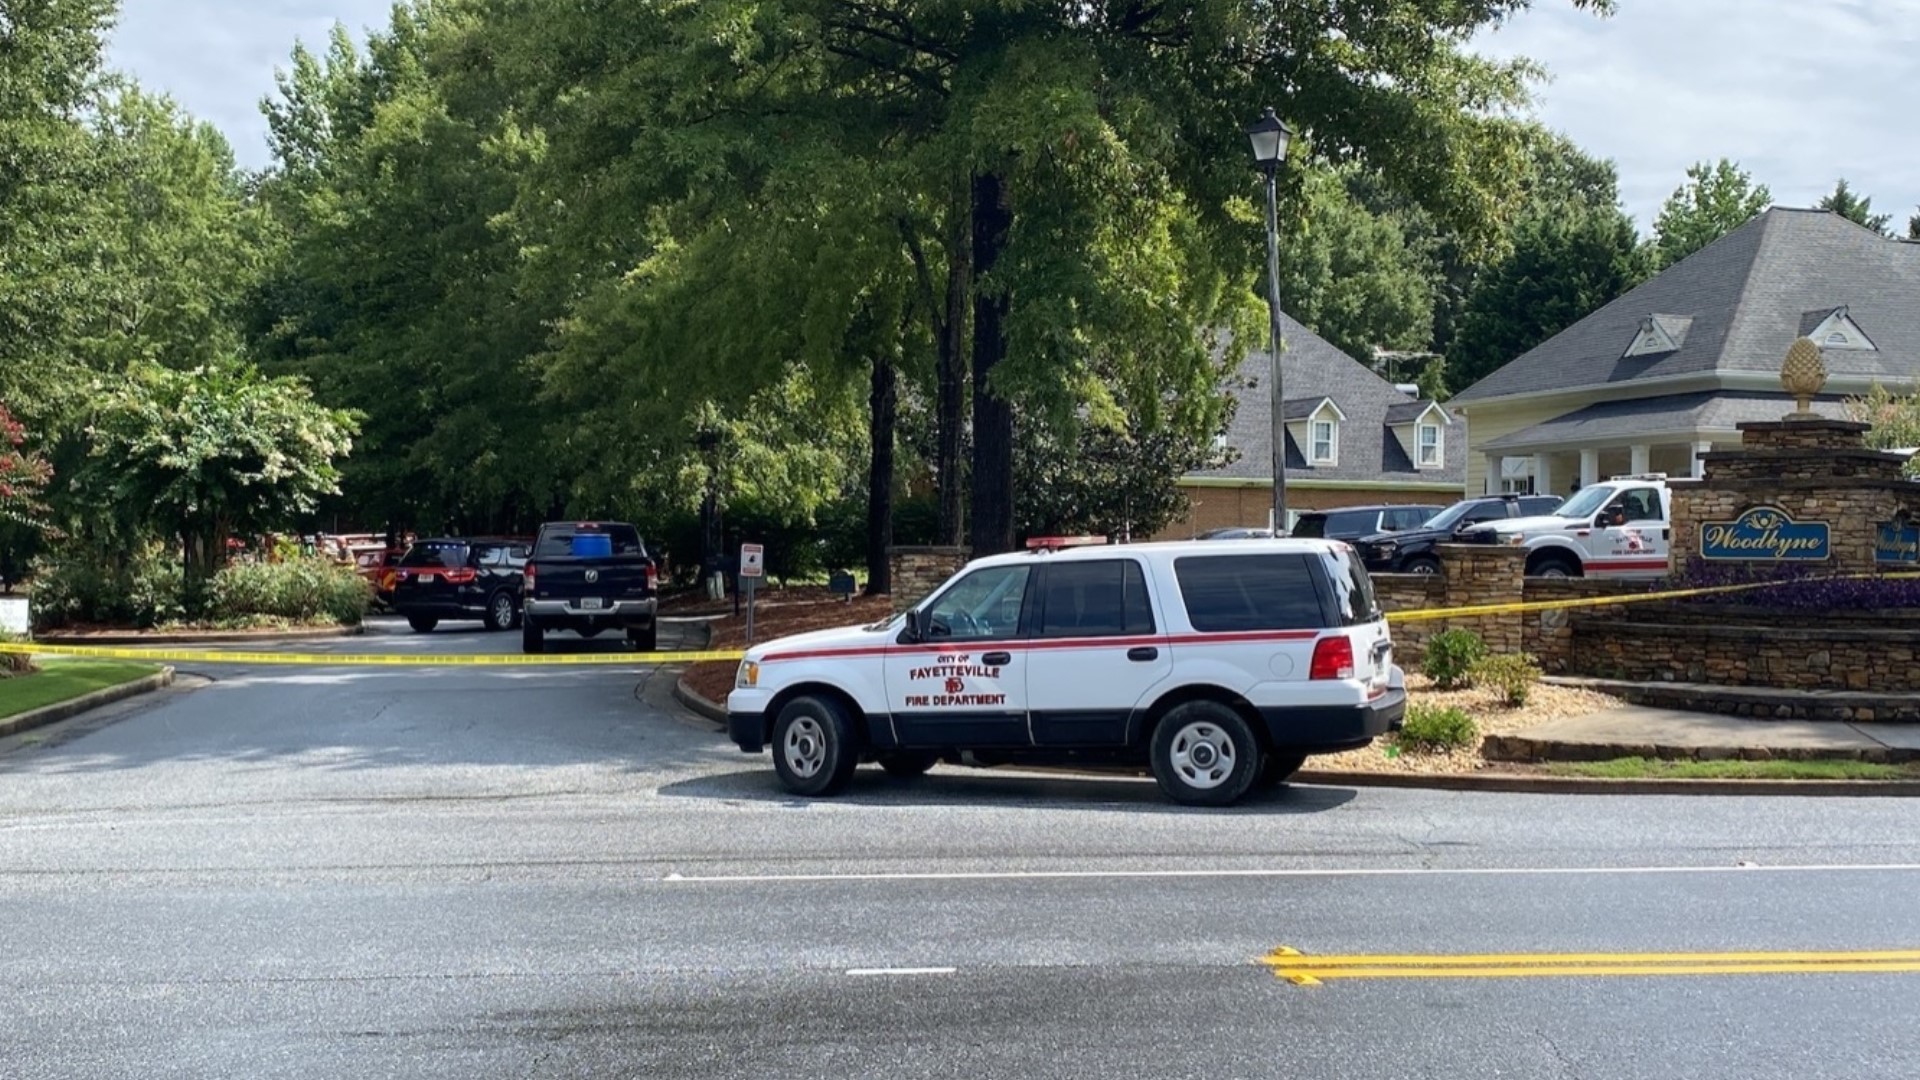 A person is being questioned after Fayetteville Police said they were called to a reported kidnapping at the Woodbyne Subdivision Tuesday.